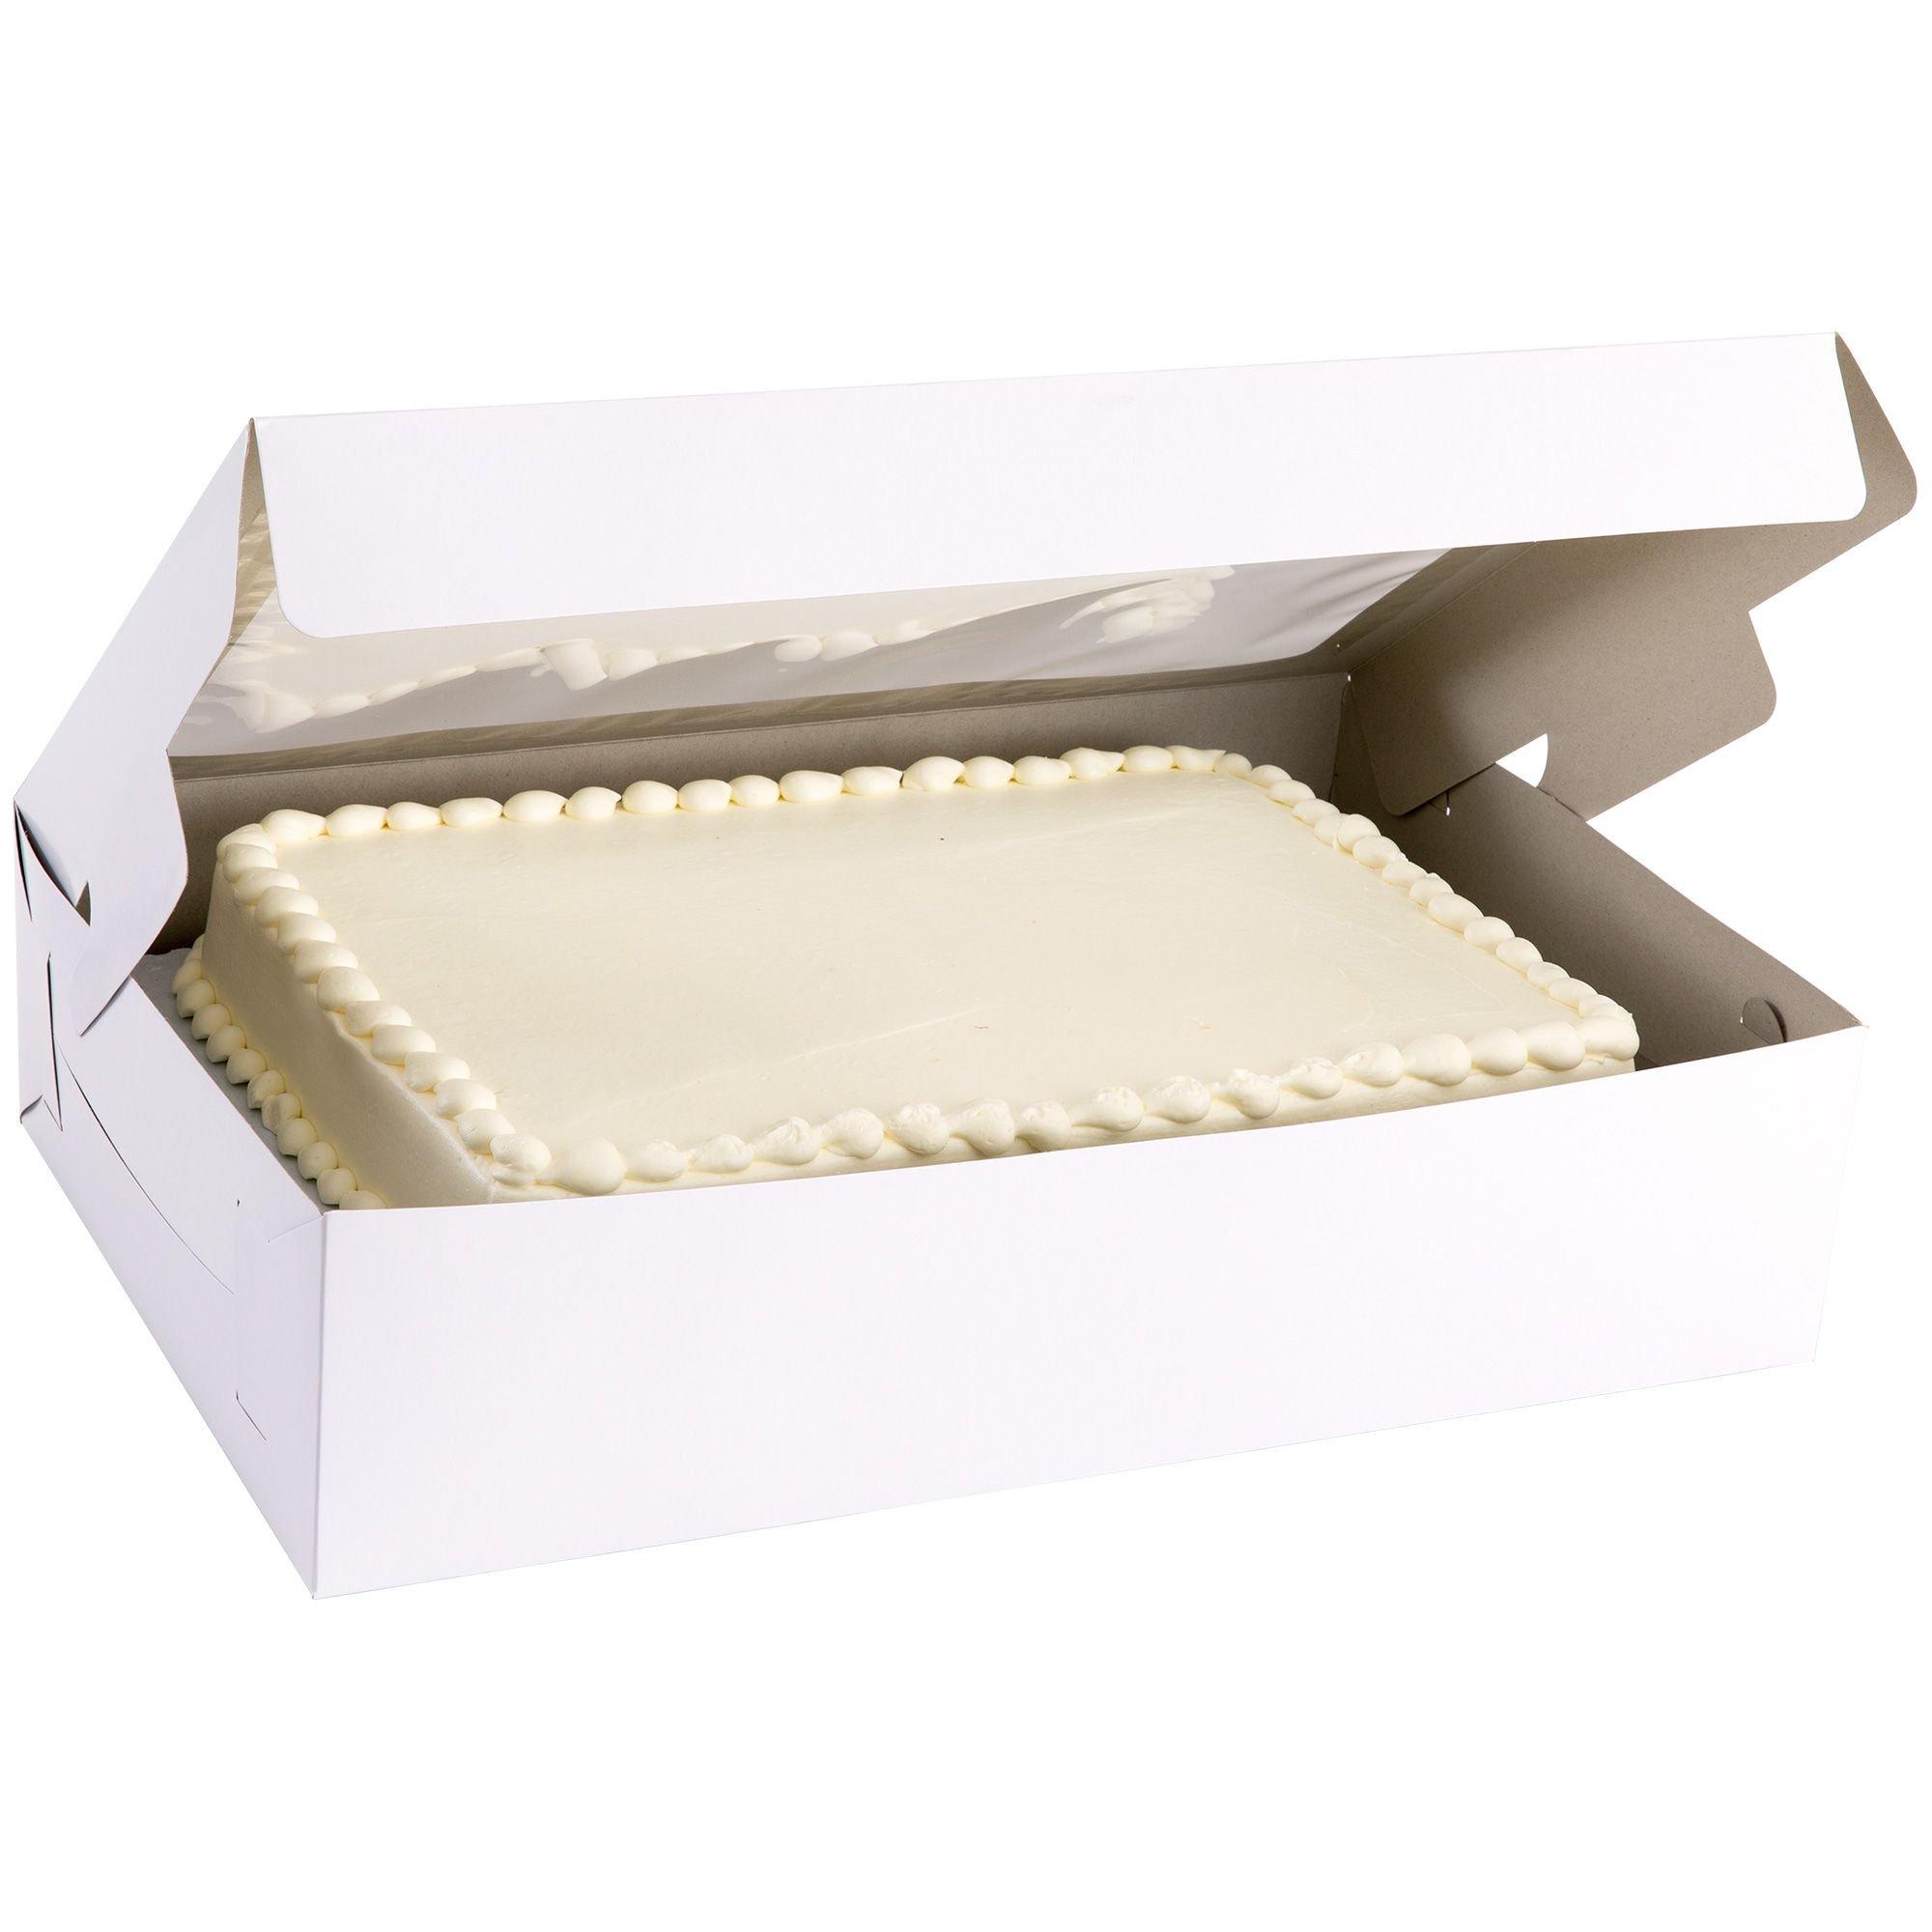 Letter Size Tray with Lid, Flat Storage Bin, 10-Pack